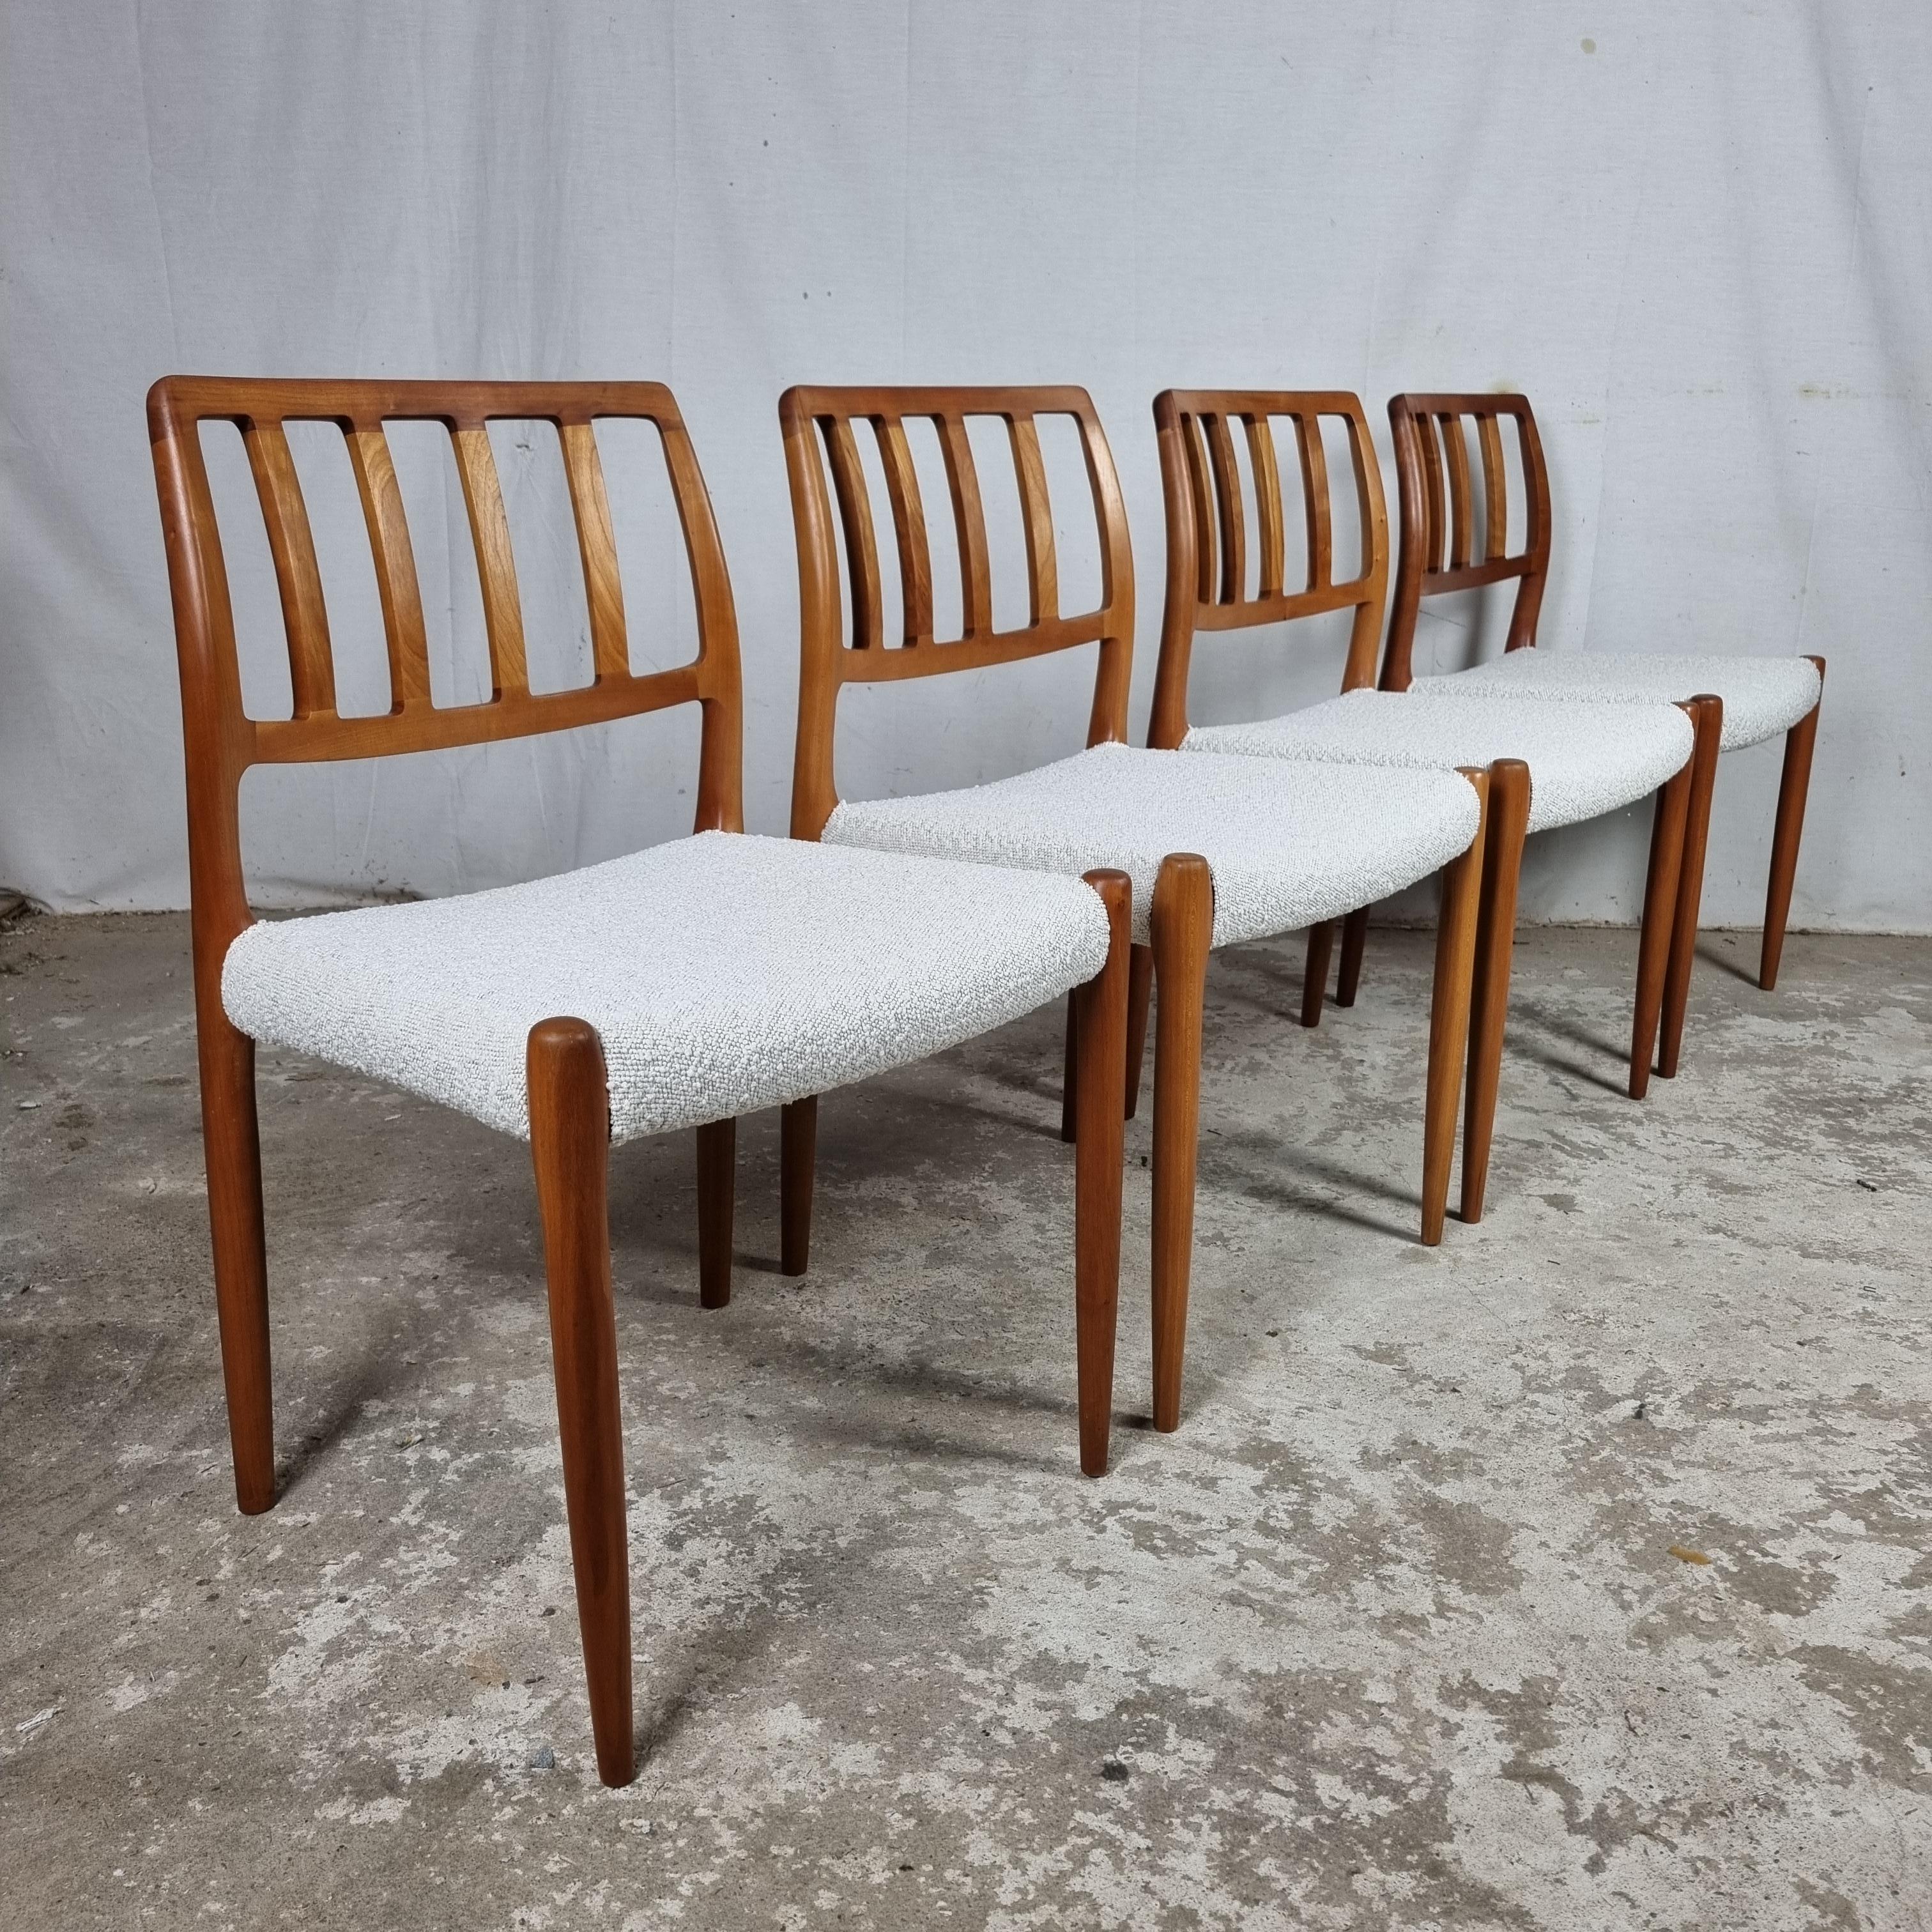 High quality Danish design from the 1970s. A creation by Niels Otto Møller, for his J.L. Møller Factory in Hojbjerg, Denmark🇩🇰.

This particular model No. 83 was designed in 1974. 

Made of solid teak wood.

The chairs have been fully restored and